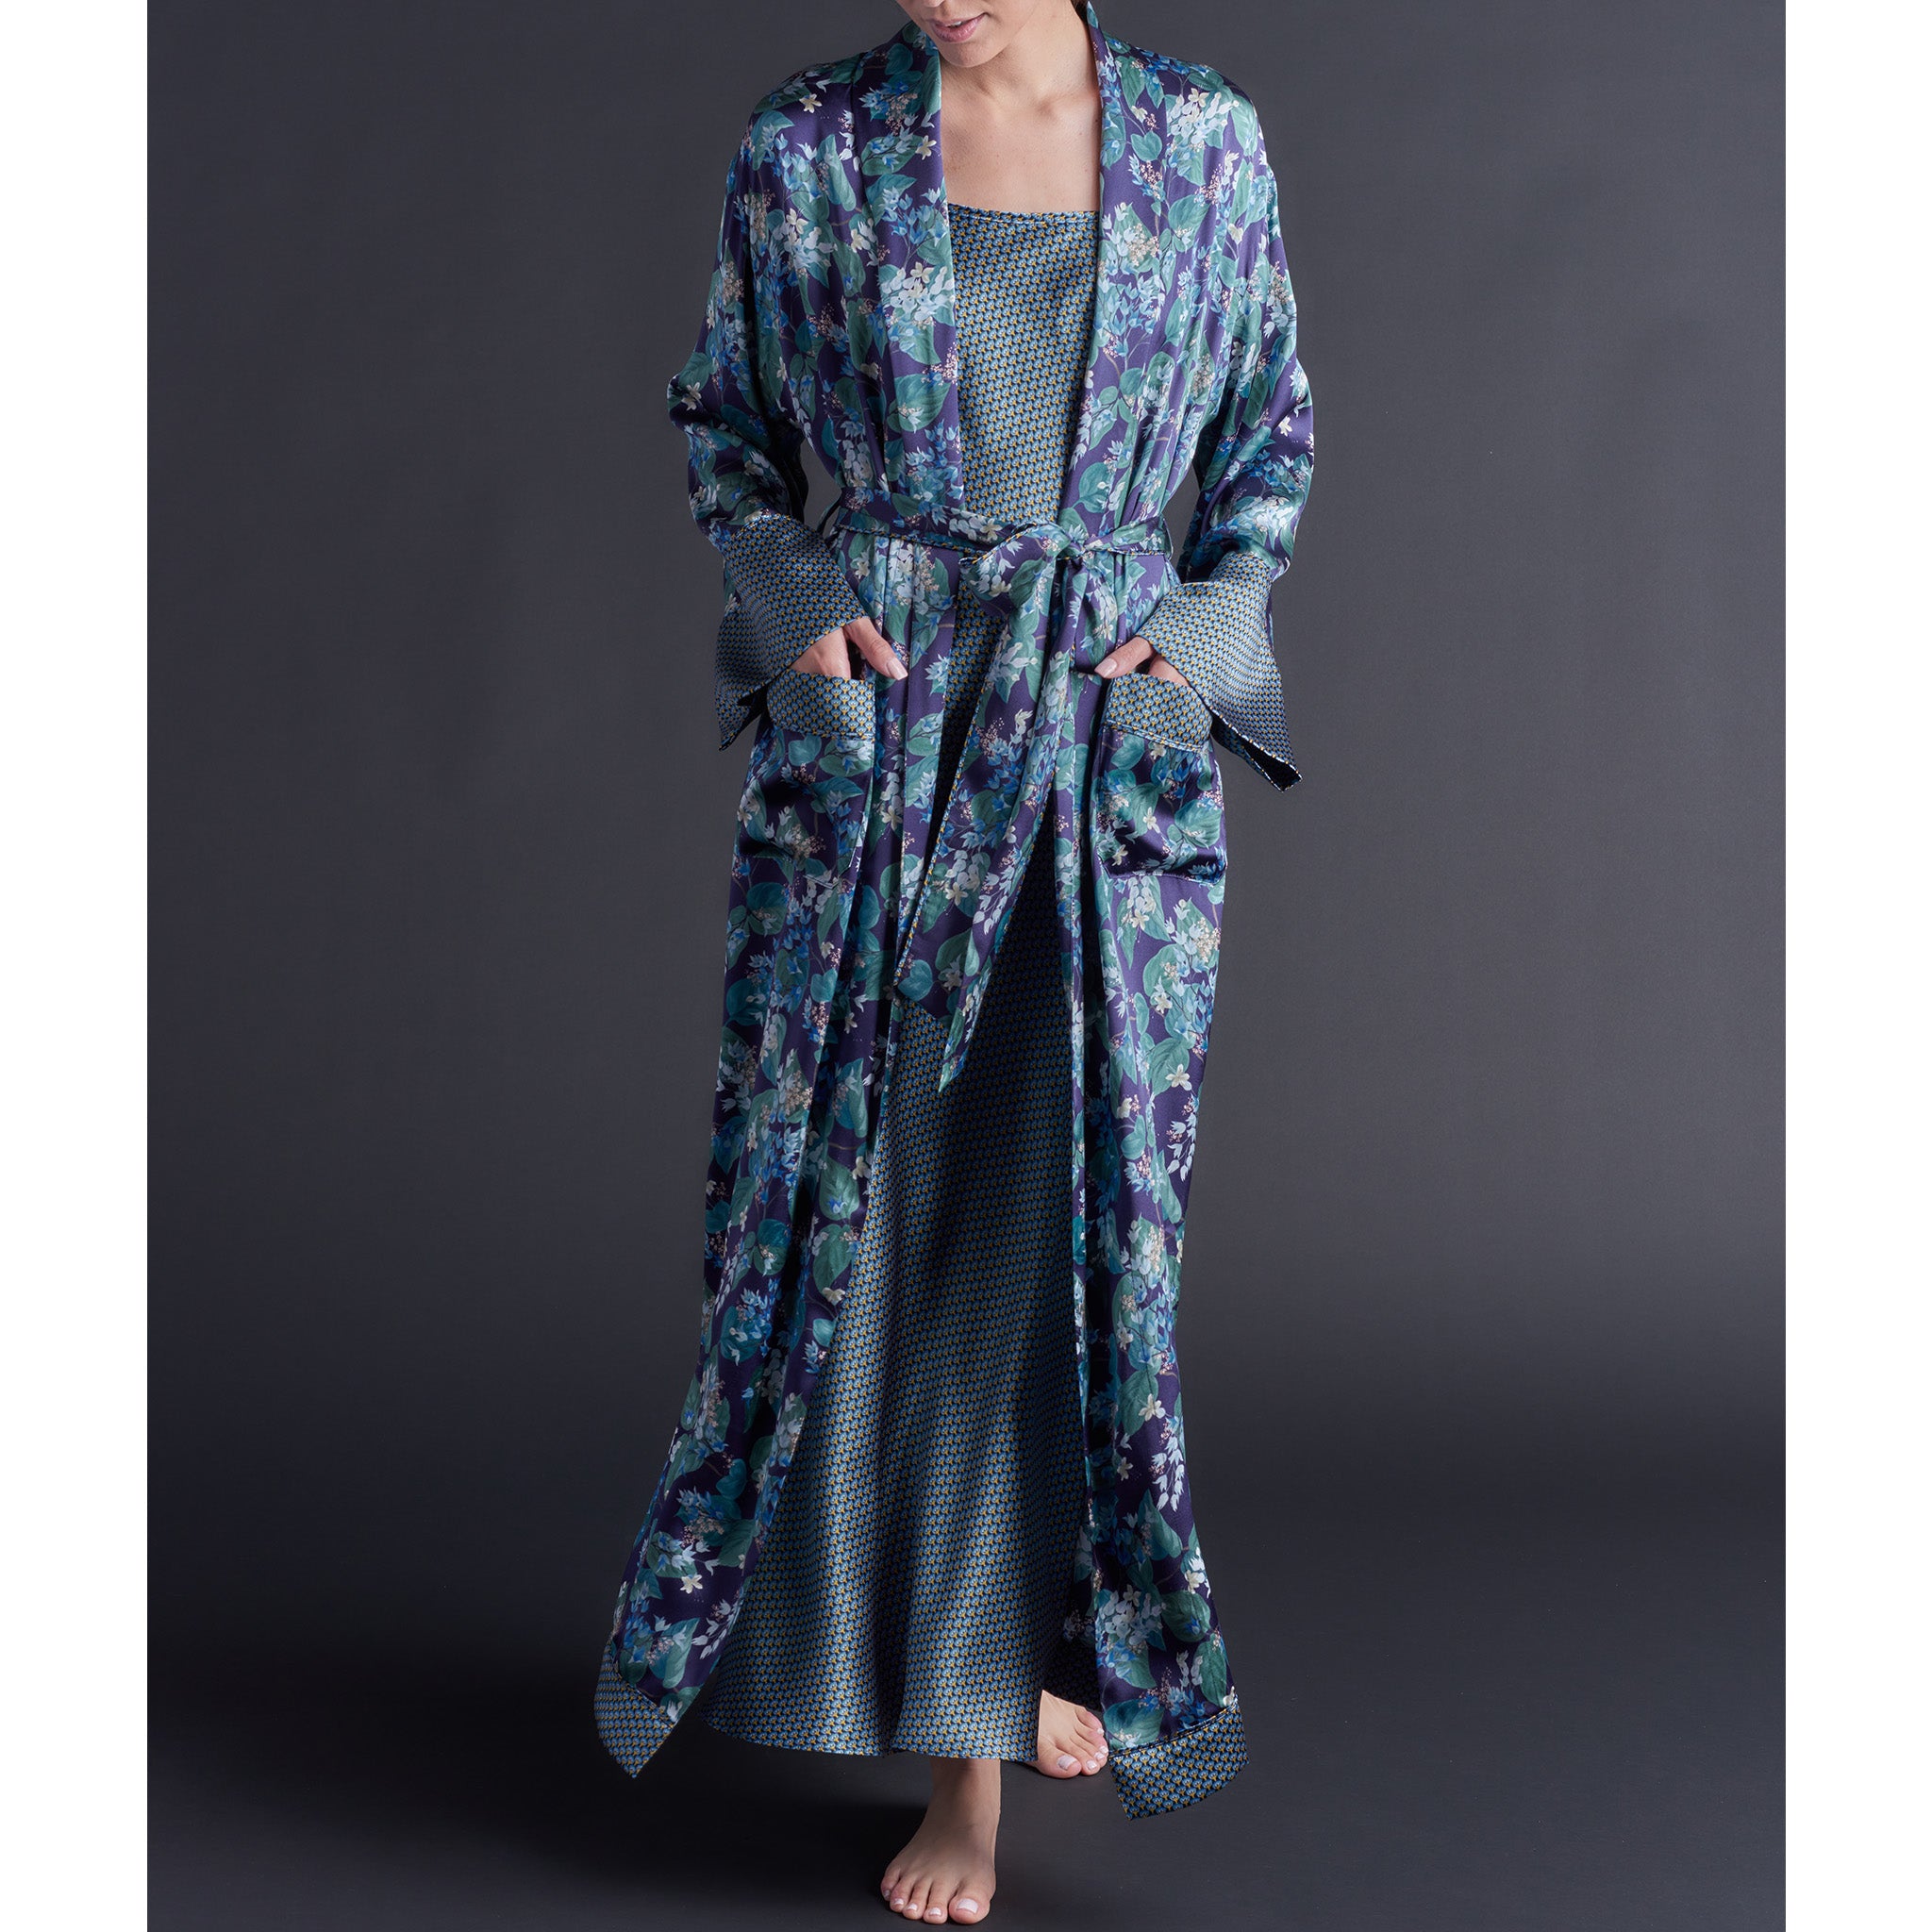 Long Claudette Robe in Osterley Liberty Print Silk Satin